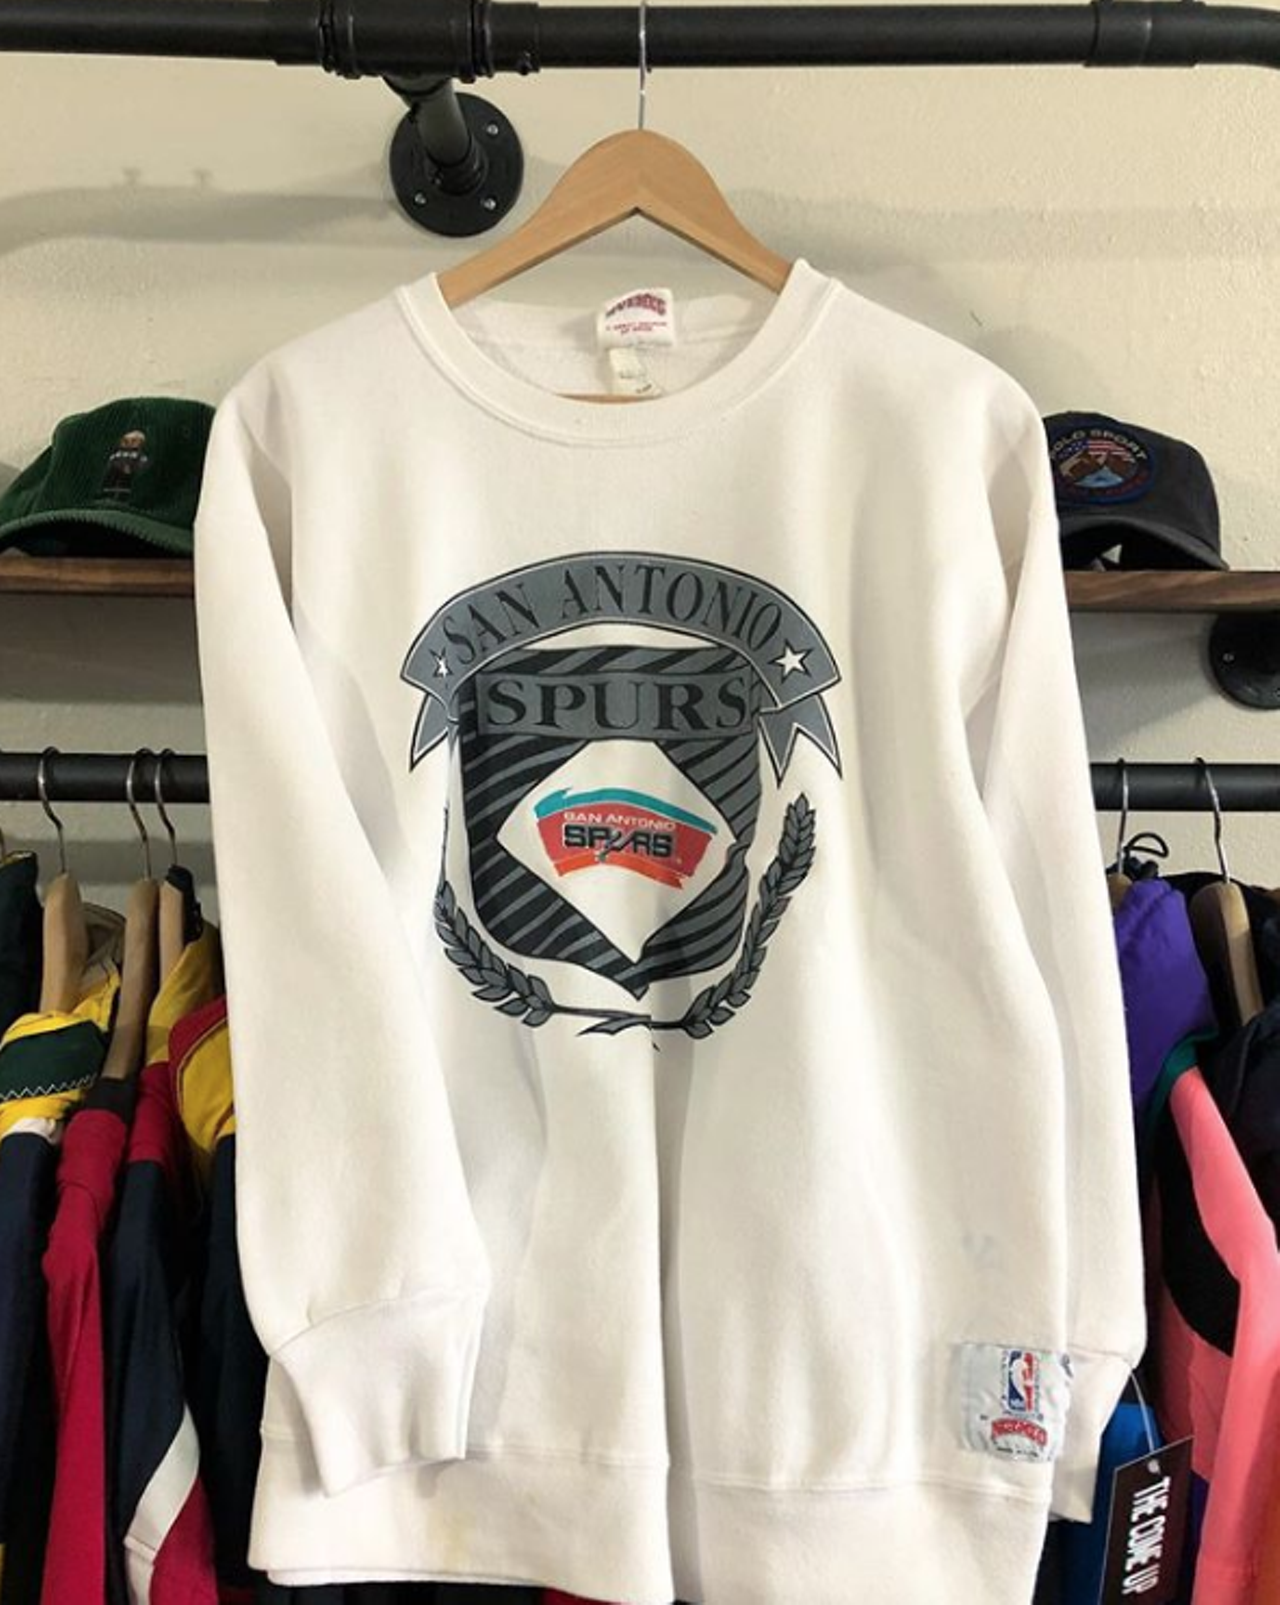 The Come Up
607 W Hildebrand Ave, (210) 556-0572, instagram.com/thecomeupsa
This unassuming shop specializes in ‘80s and ‘90s gear in men’s and women’s styles. You’ll be looking like you just walked out of the “Finesse” music video. Eat your heart out, Bruno Mars.
Photo via Instagram / thecomeupsa